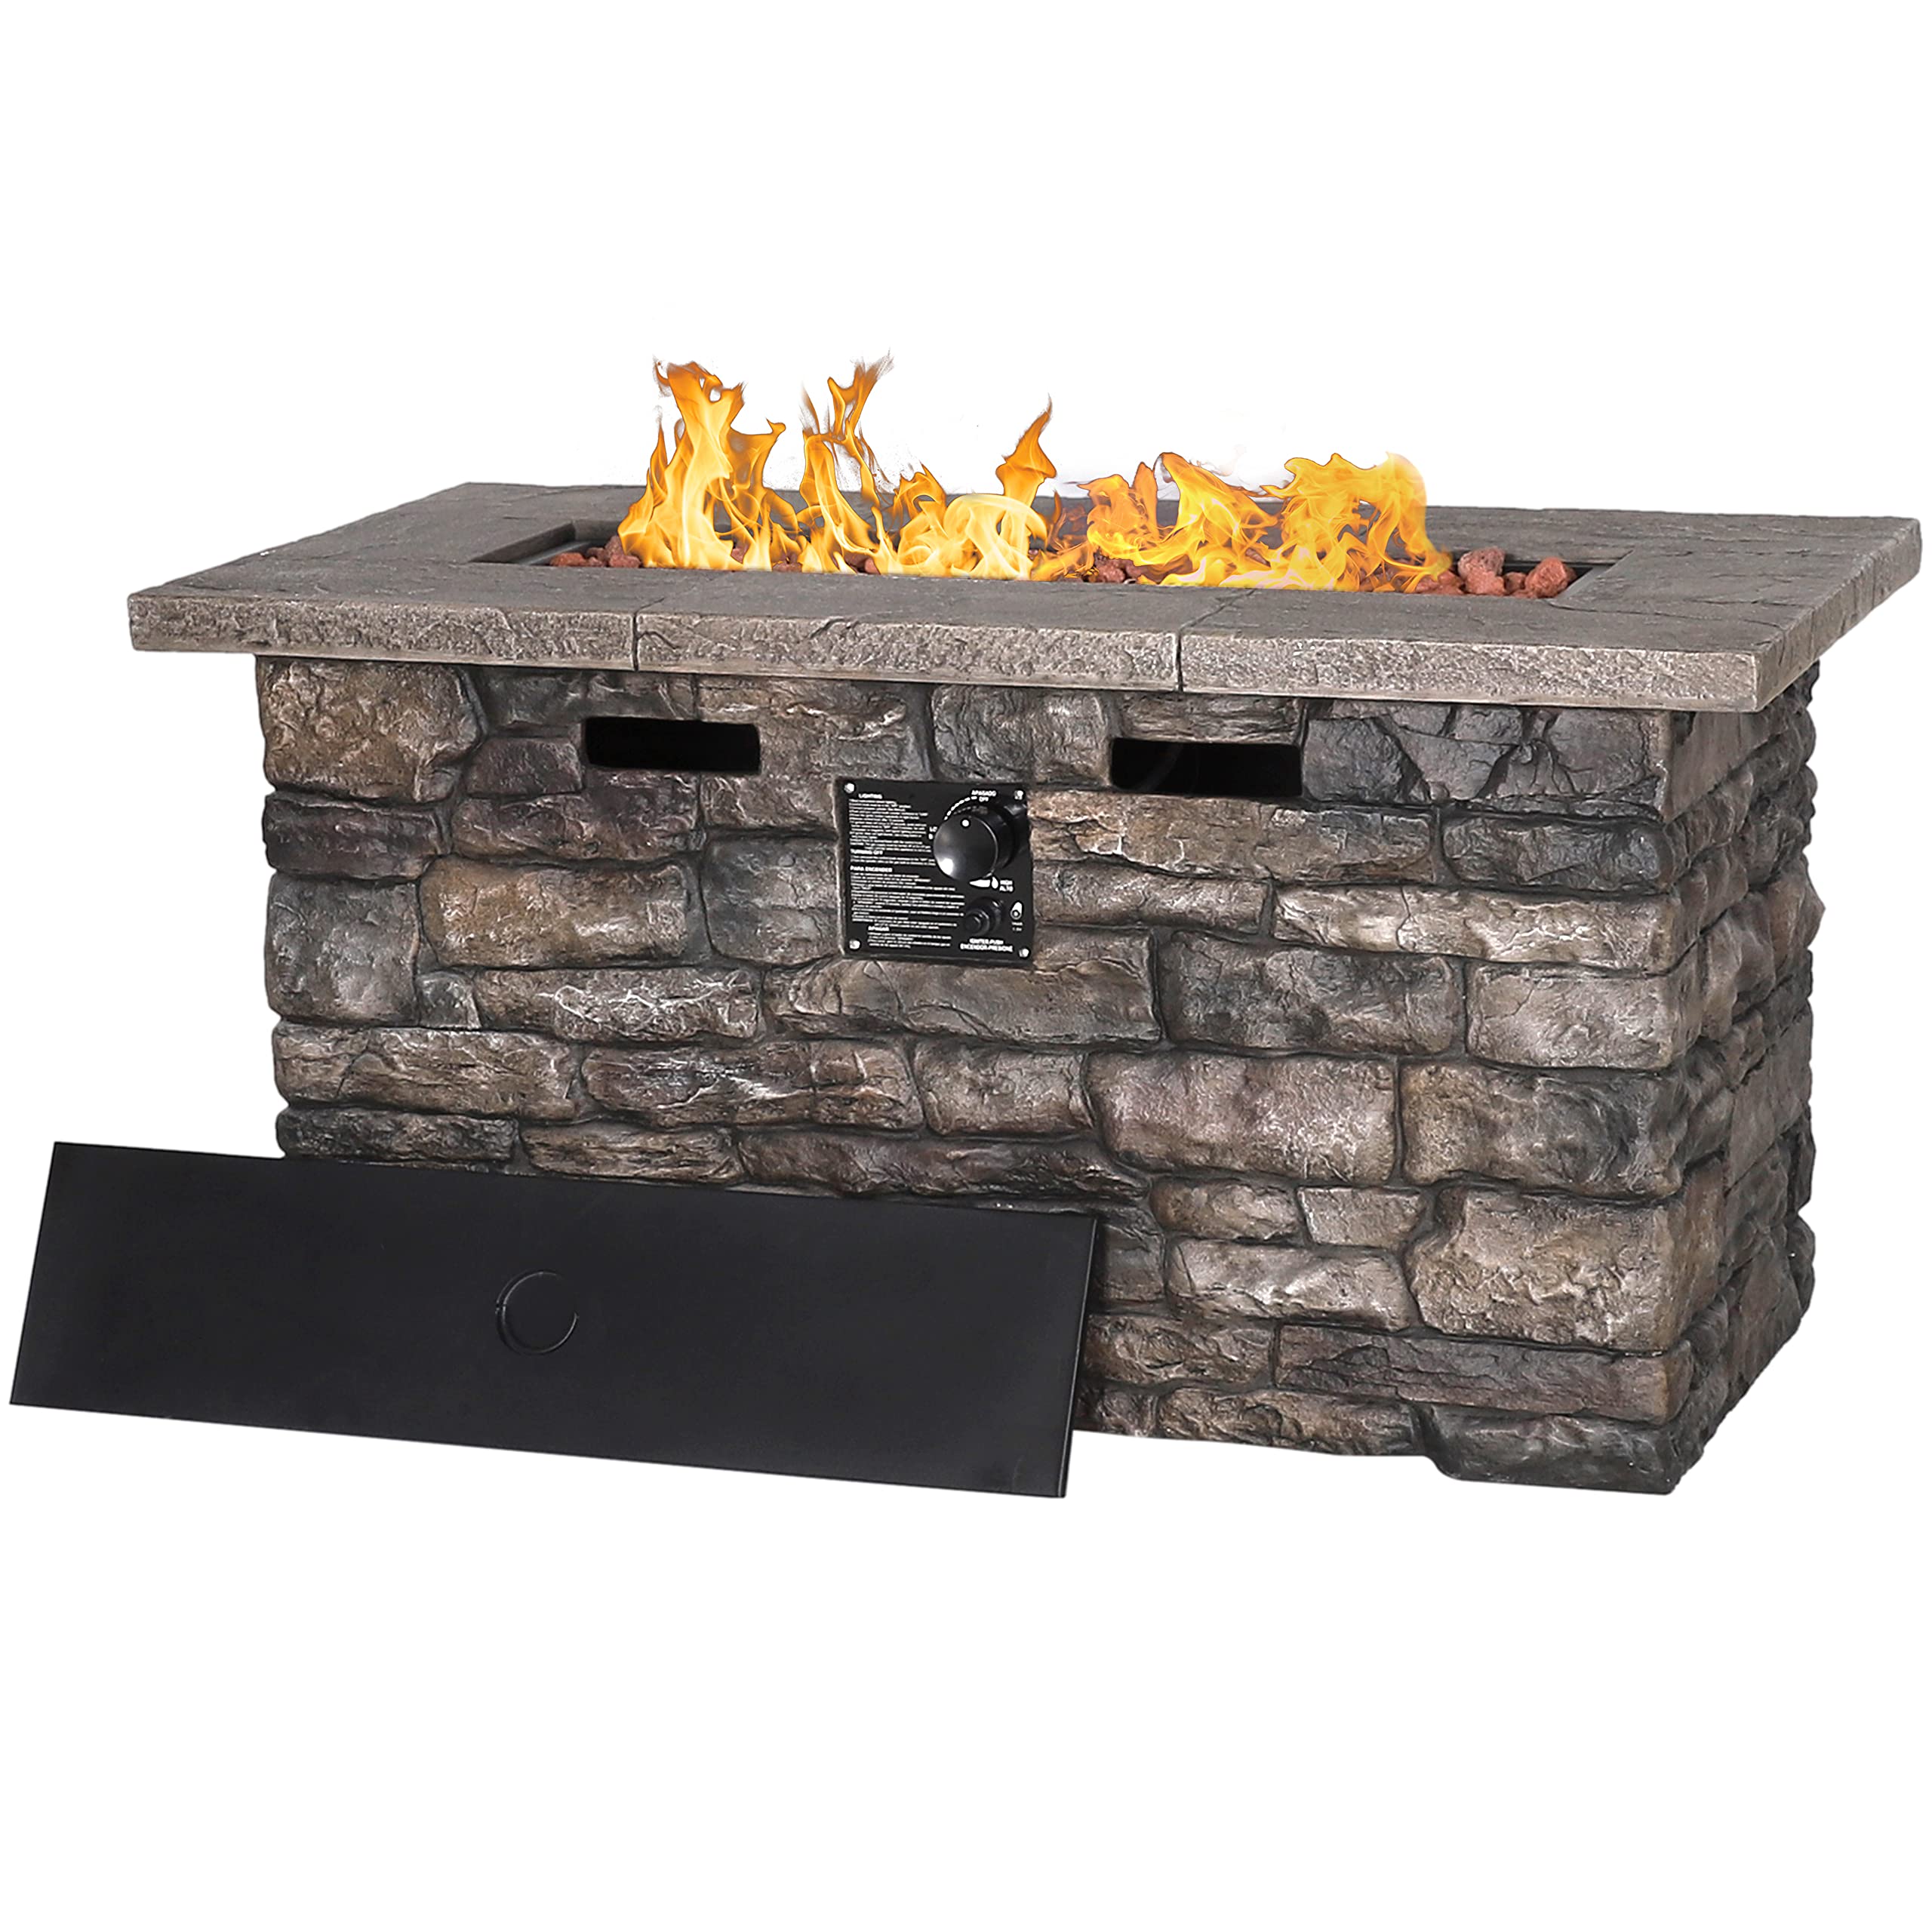 MUPATER Outdoor Propane Gas Fire Pit Table for Outside Patio with Lid, Cover and Lava Rocks, Outdoor Firepit Table Rectangle with 50000 BTU Stainless Steel Burner and Hose, 46.4''L x 22.5''W x 23.6''H